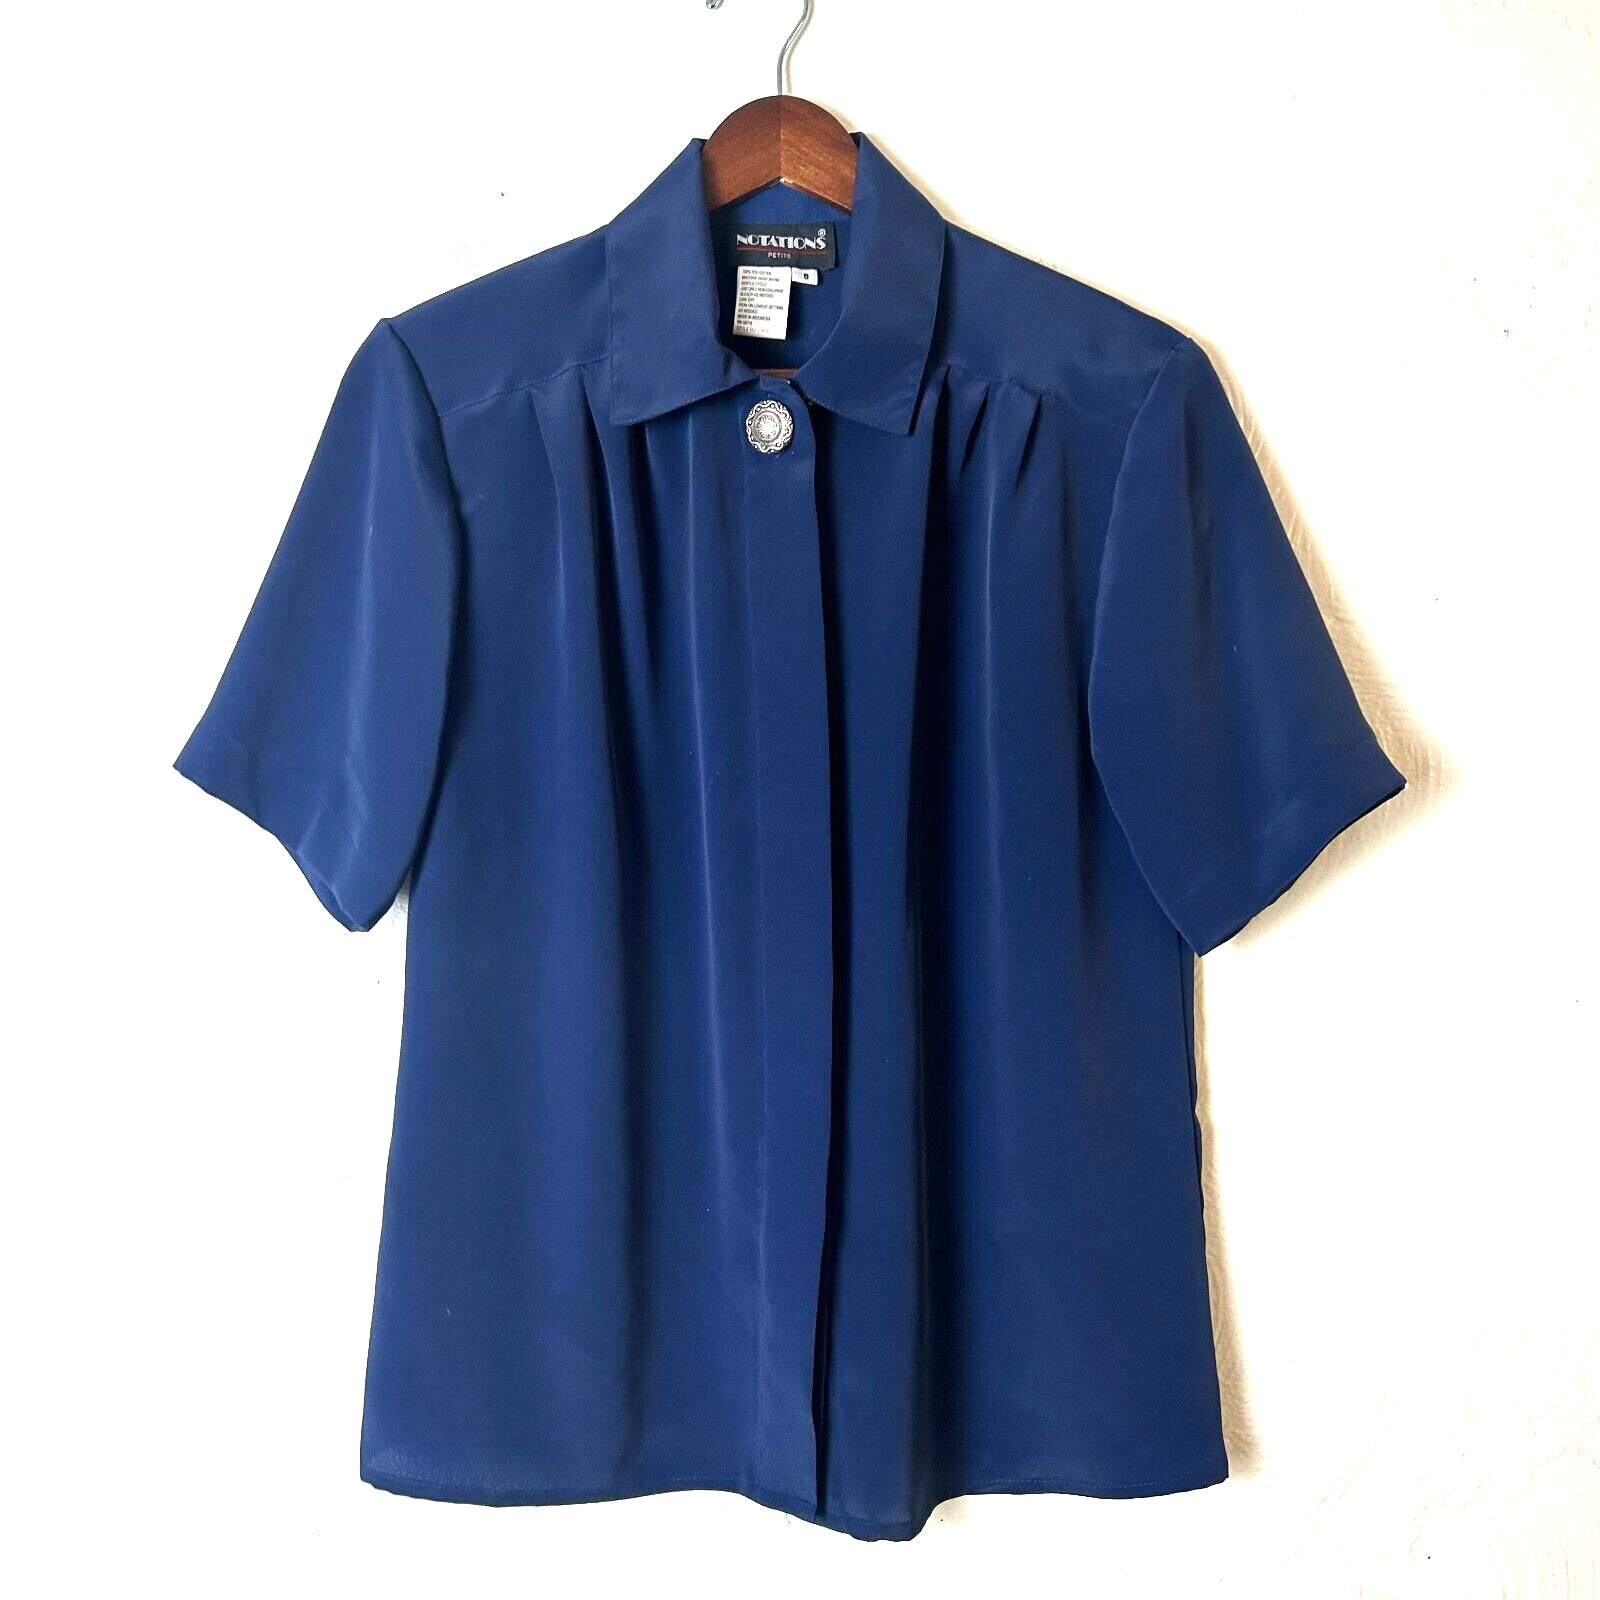 Vintage Notations Blouse Navy Blue Short Sleeve Button Collared Silky 90s Womens